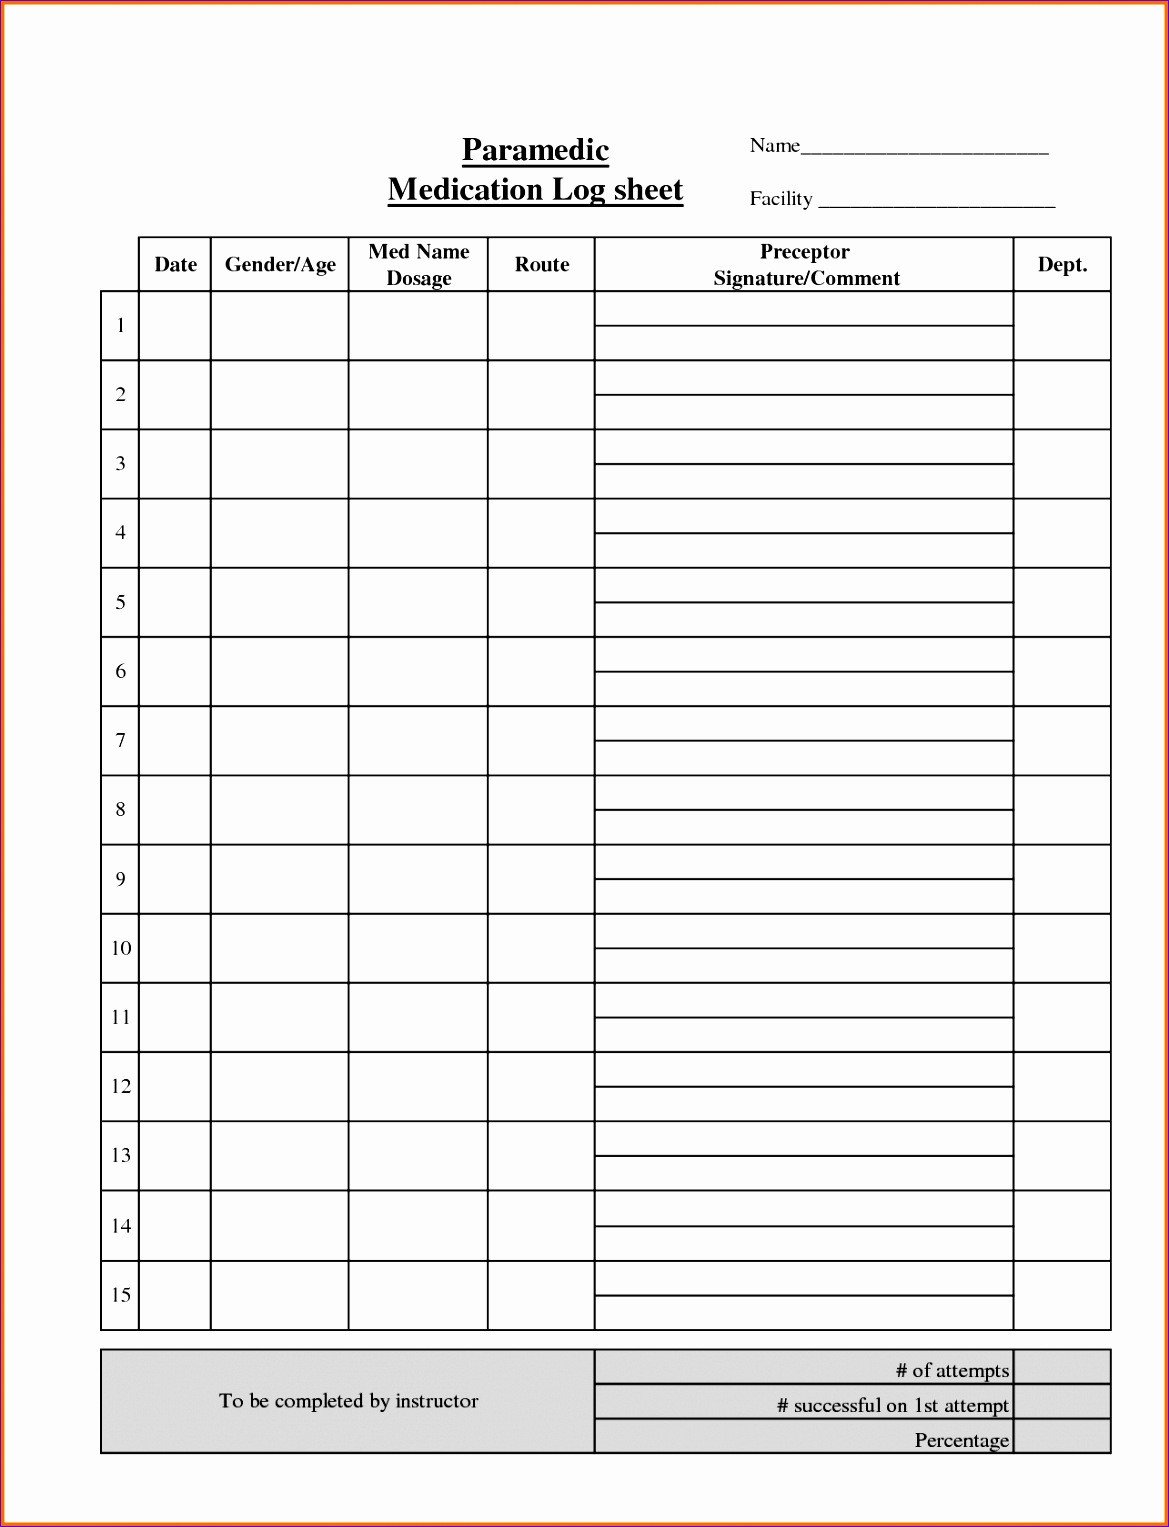 Punch List Template Excel 10 Punch List Template Excel Exceltemplates Exceltemplates